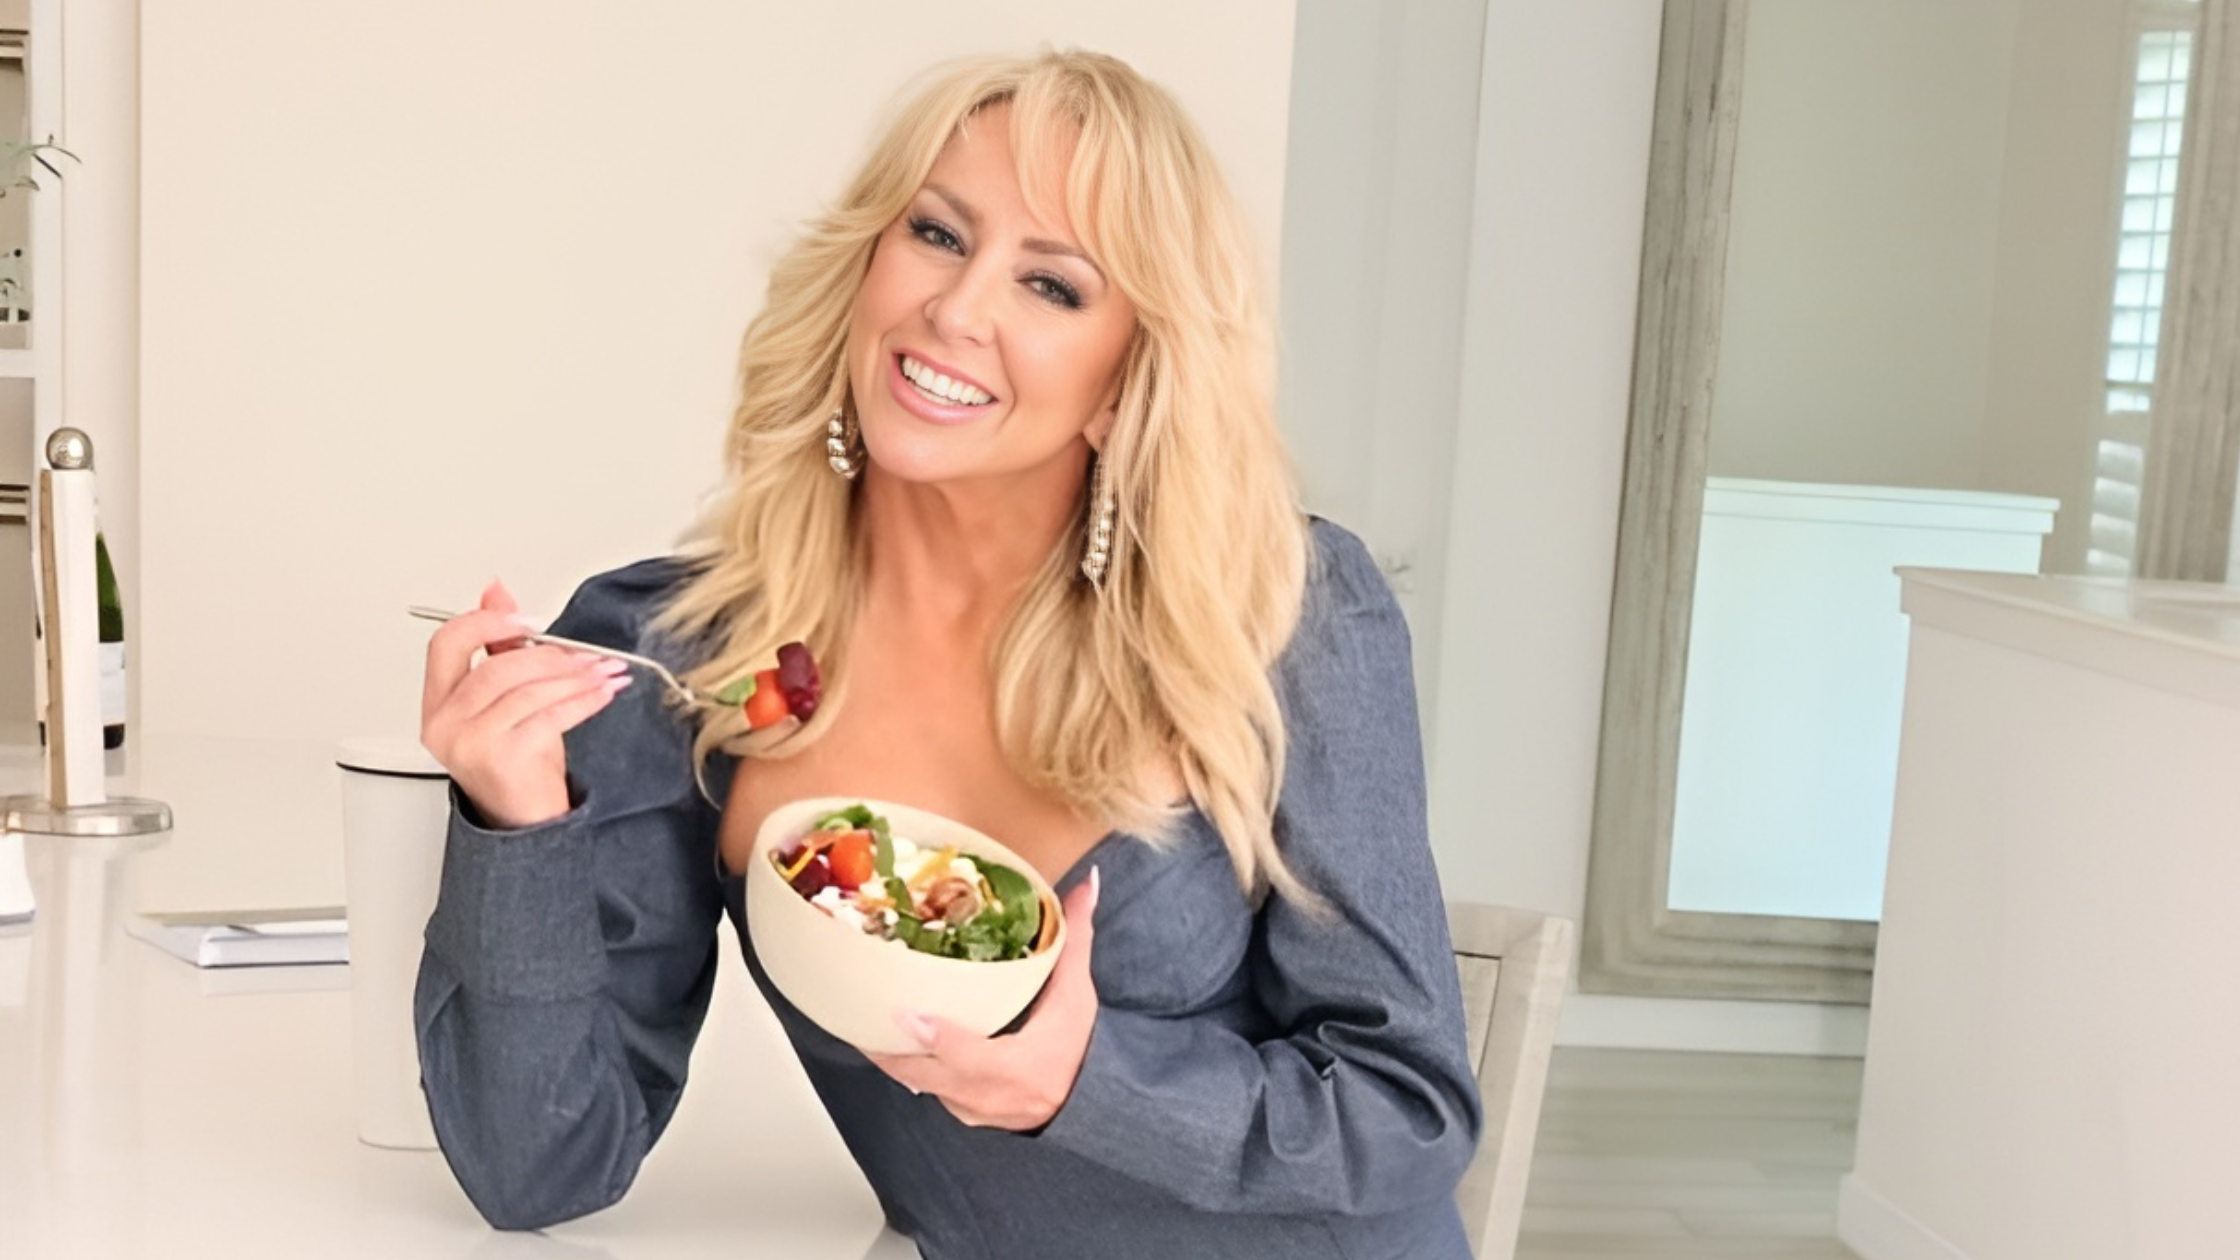 Chalene Johnson smiling, holding a meal in a well-lit kitchen